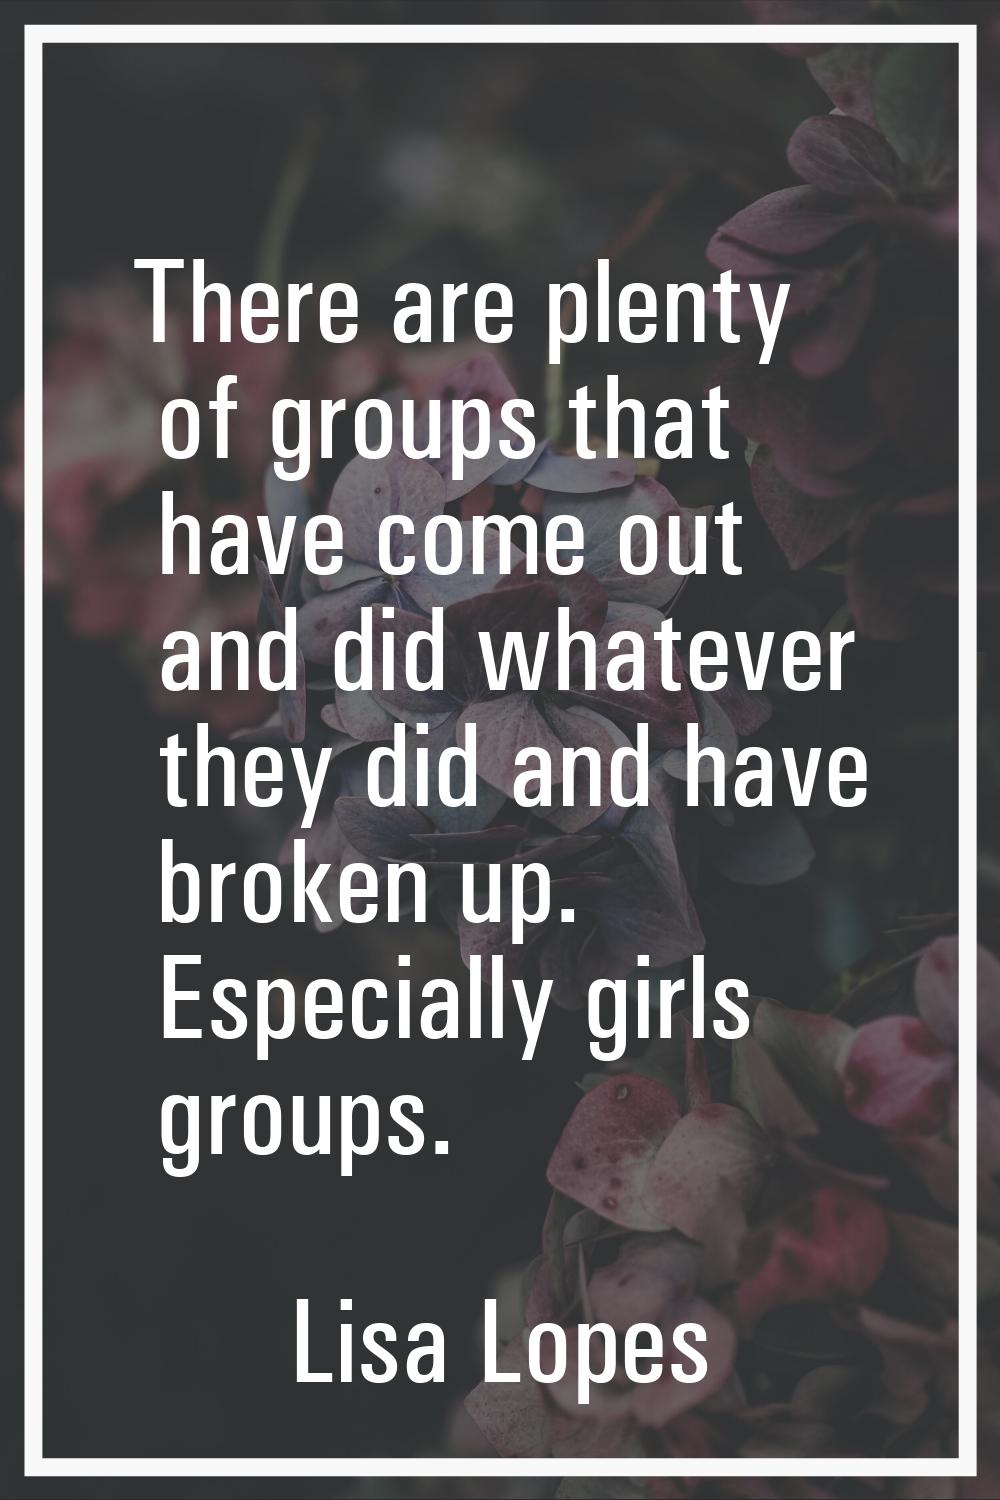 There are plenty of groups that have come out and did whatever they did and have broken up. Especia